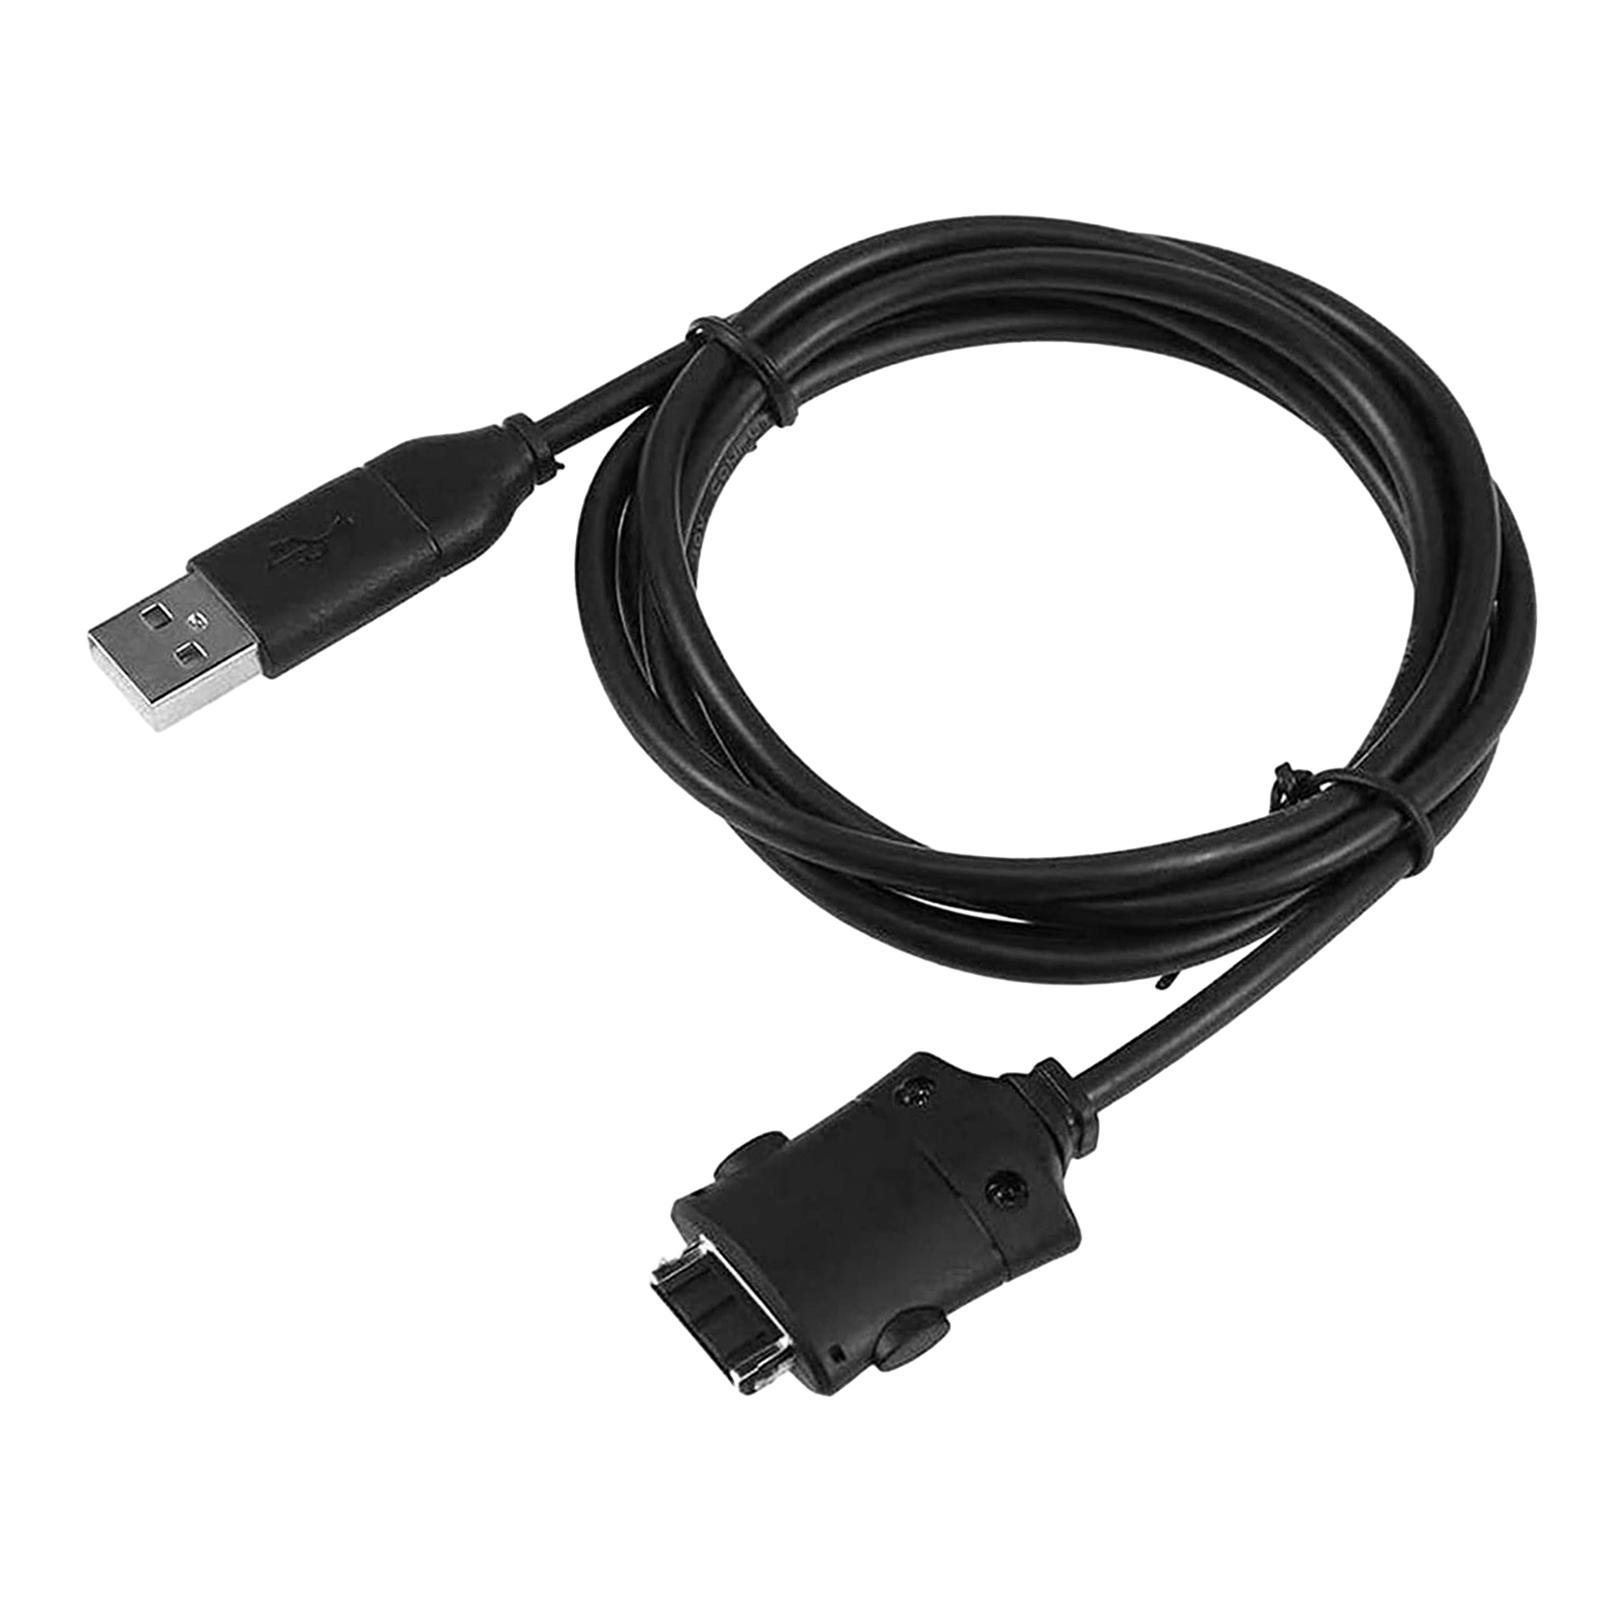 Suc USB Data Charging Cable Cord ,1.5M, Durable, Easy to Use, Spare Parts Black Replacement Transfer Cord for Digital Camera L83T L830 i6 L74